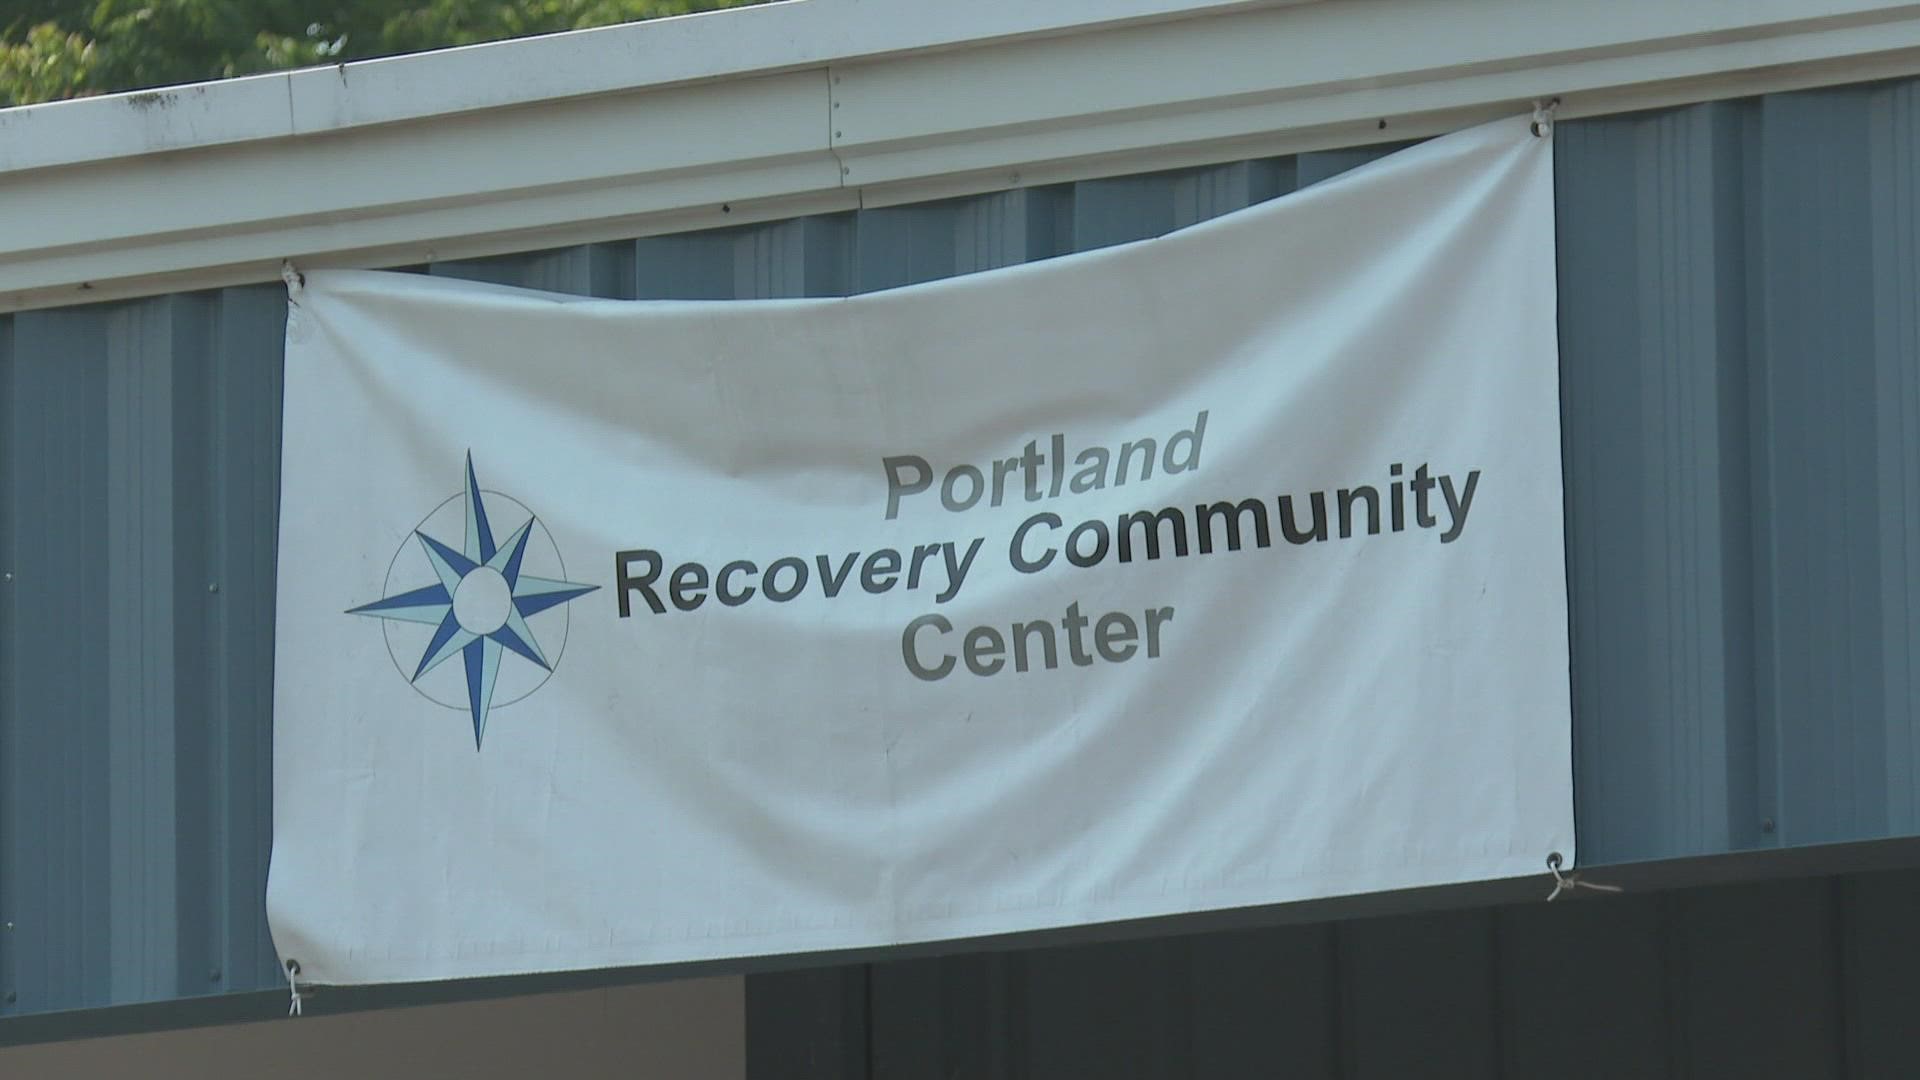 The Portland Recovery Community Center opened a new building on Bishop Street, giving the organization more room for programs.